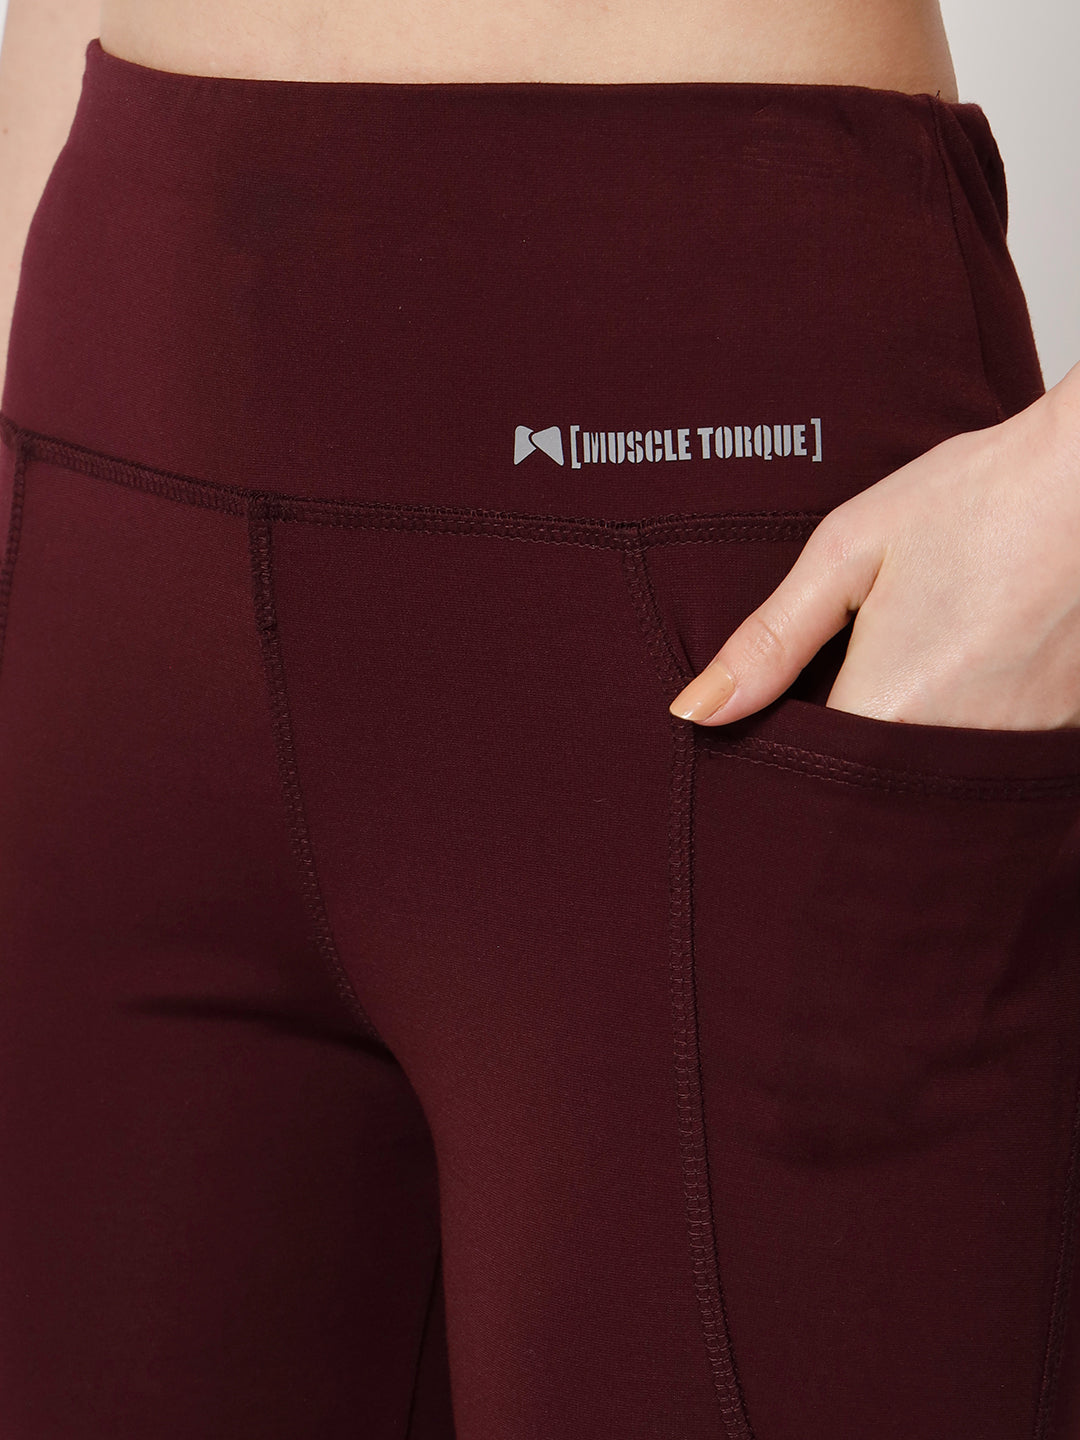 High Waist All Day Pant – Wine